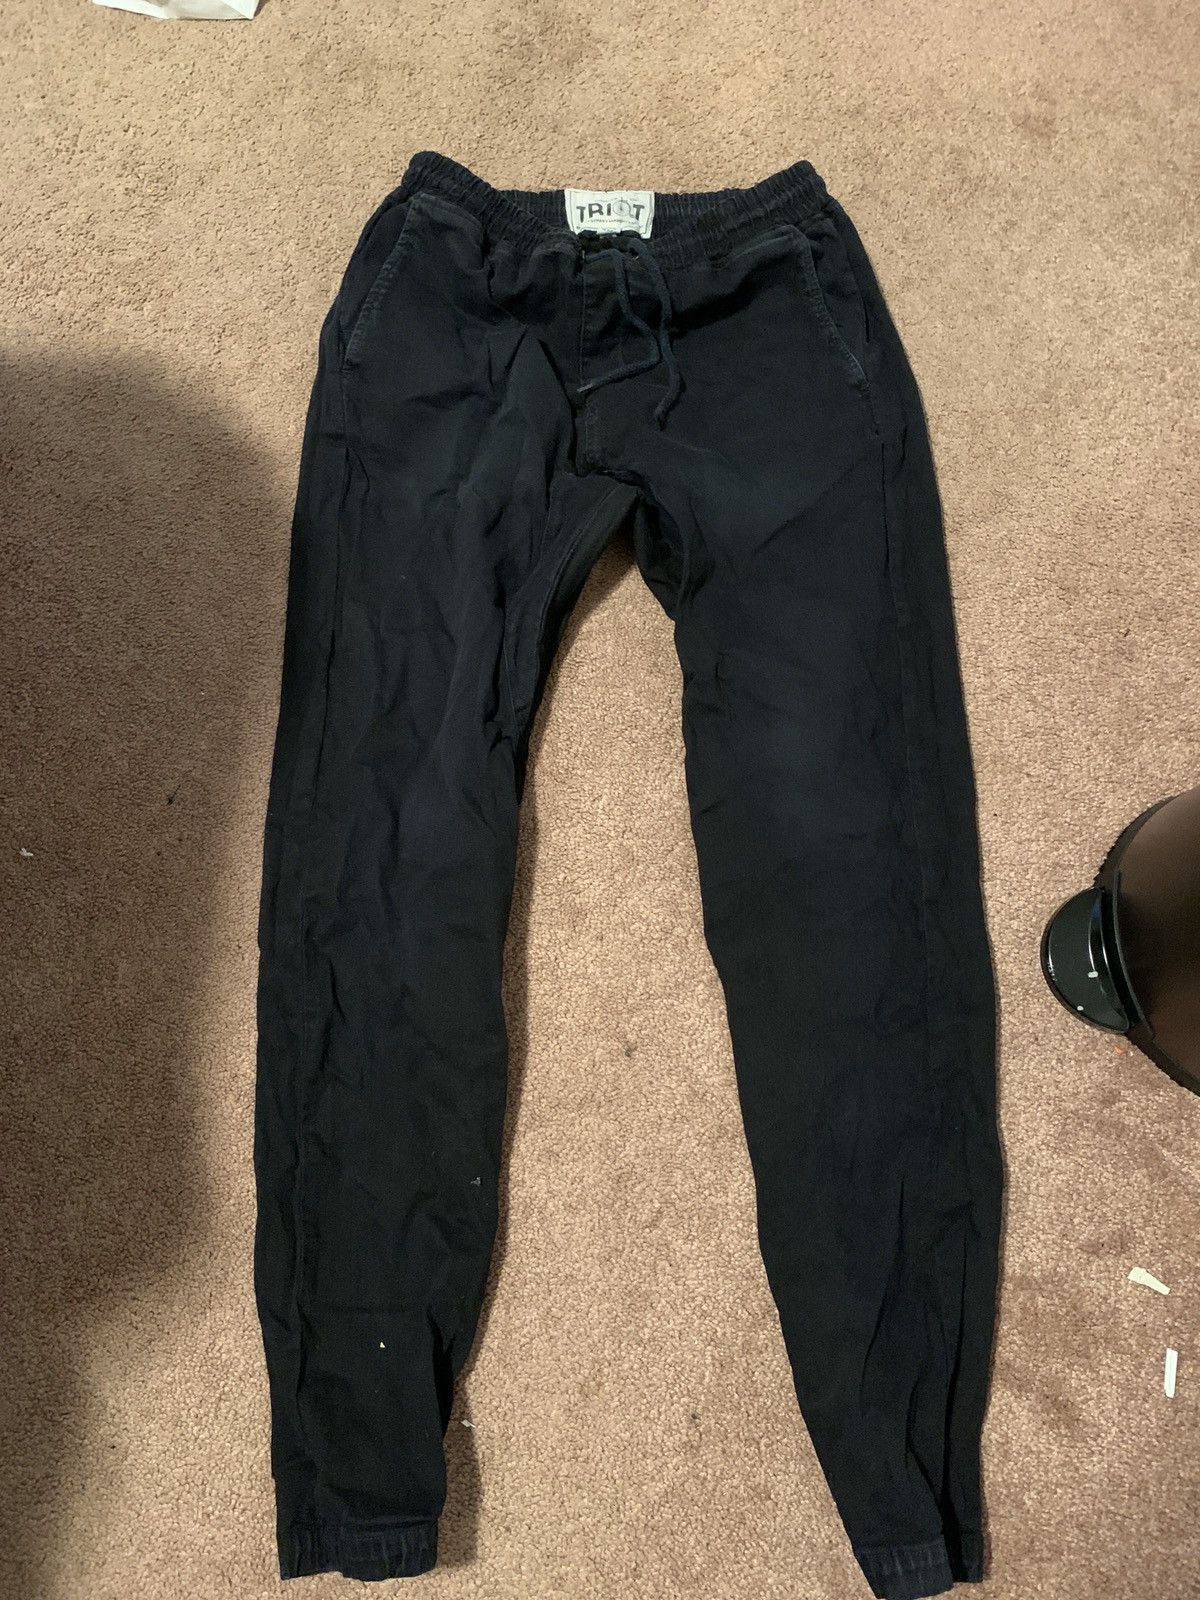 Other House of Triot jogger pants men size medium | Grailed